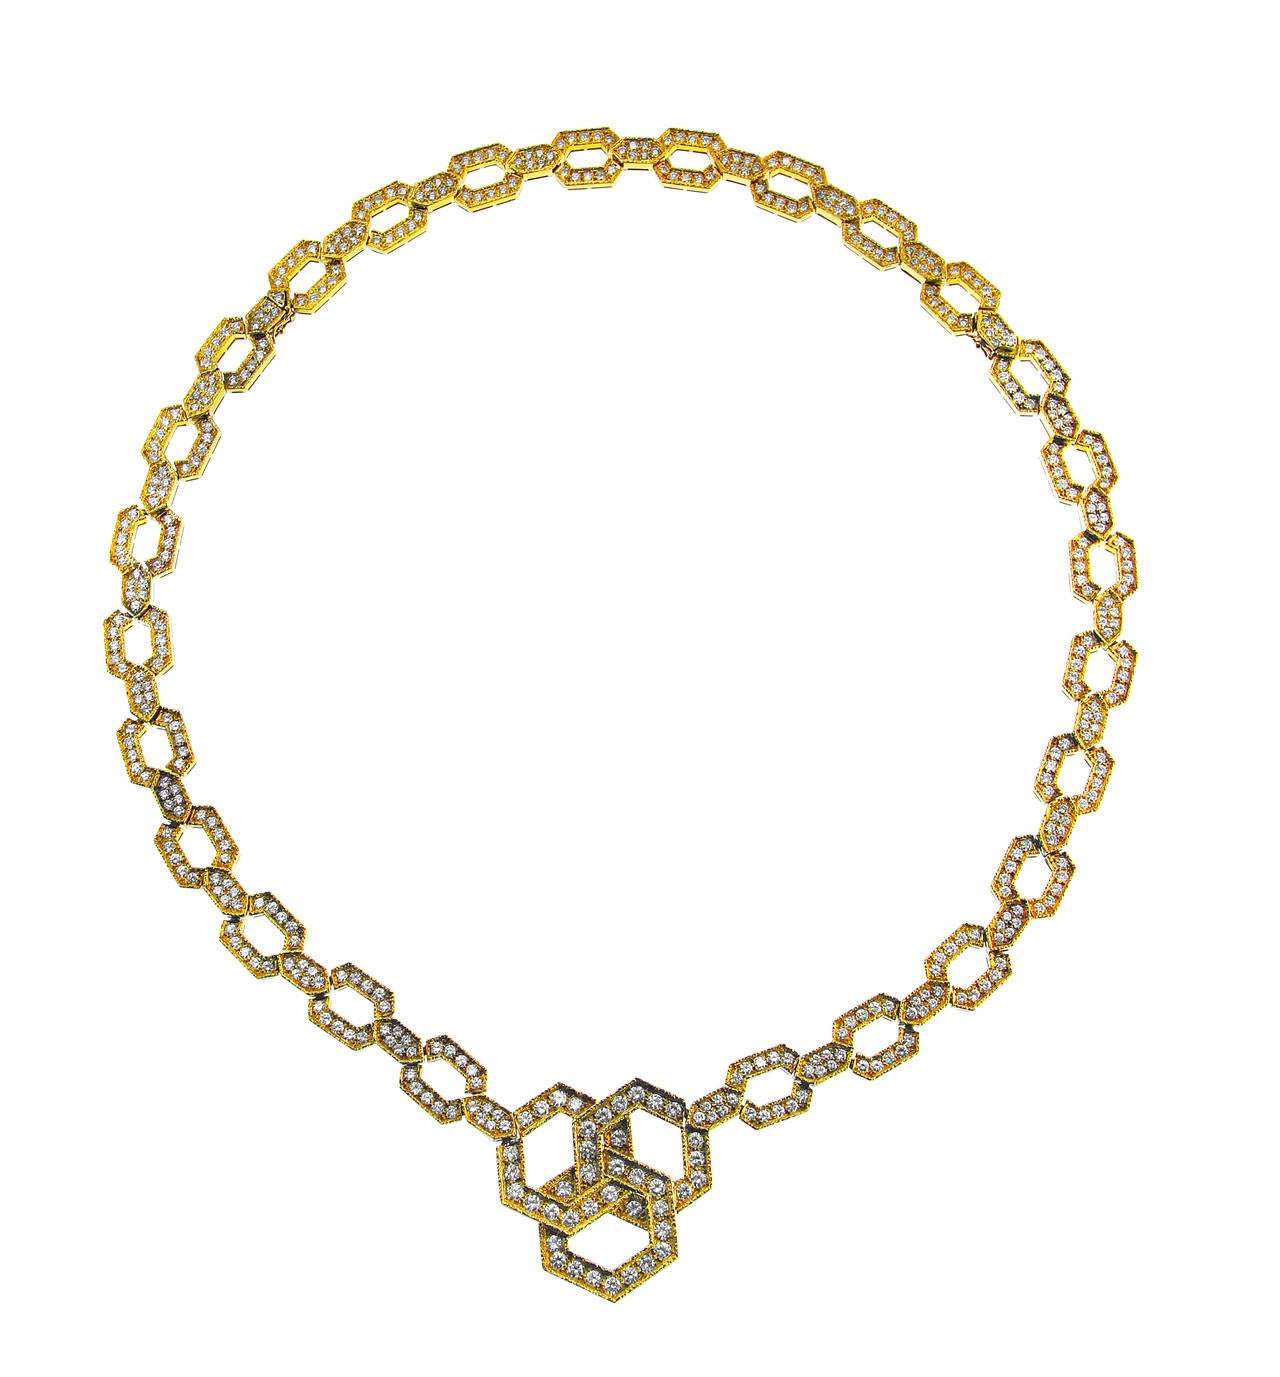 An 18 karat yellow gold and diamond necklace/bracelet combination by Van Cleef & Arpels, circa 1980s, designed as a series of geometric links completed by a larger interlocking link section at the center, set throughout with 262 round diamonds